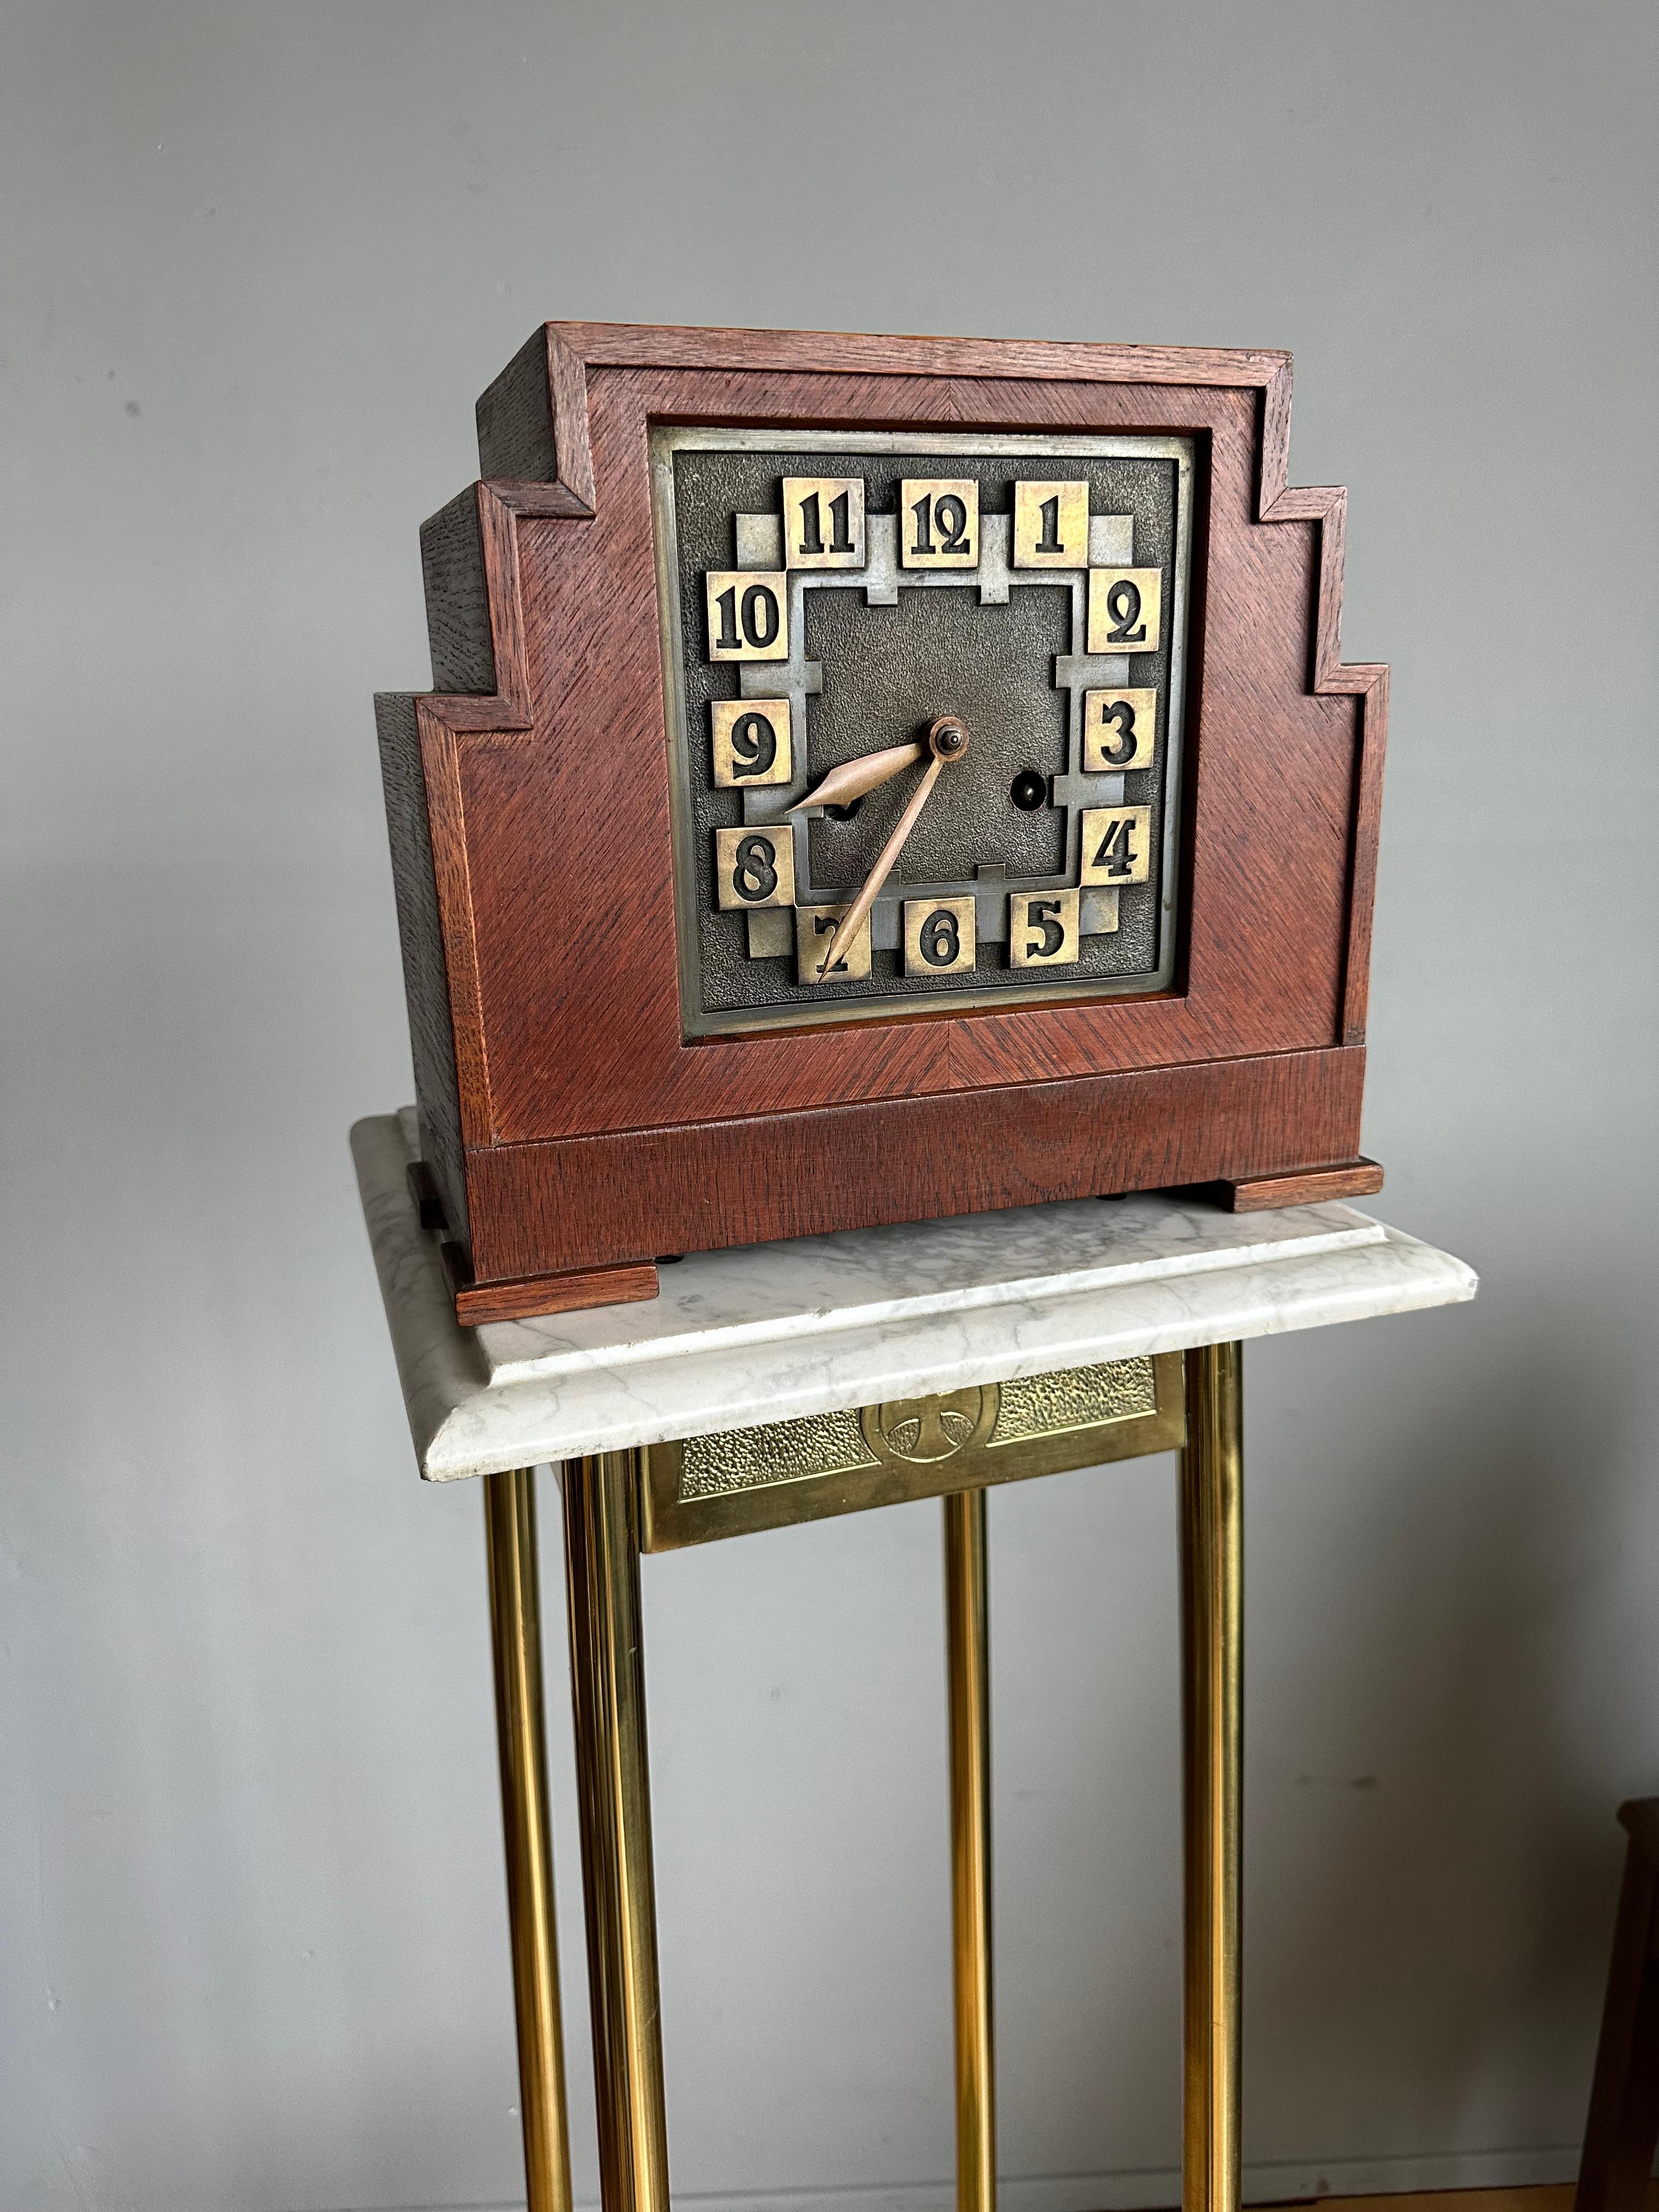 Early 20th century, great condition Dutch Arts & Crafts mantle / table / desk clock.

To have found this stunning and wonderful design, Dutch Arts & Crafts table clock was a treat, but to find it in this amazing condition again made our day. For it